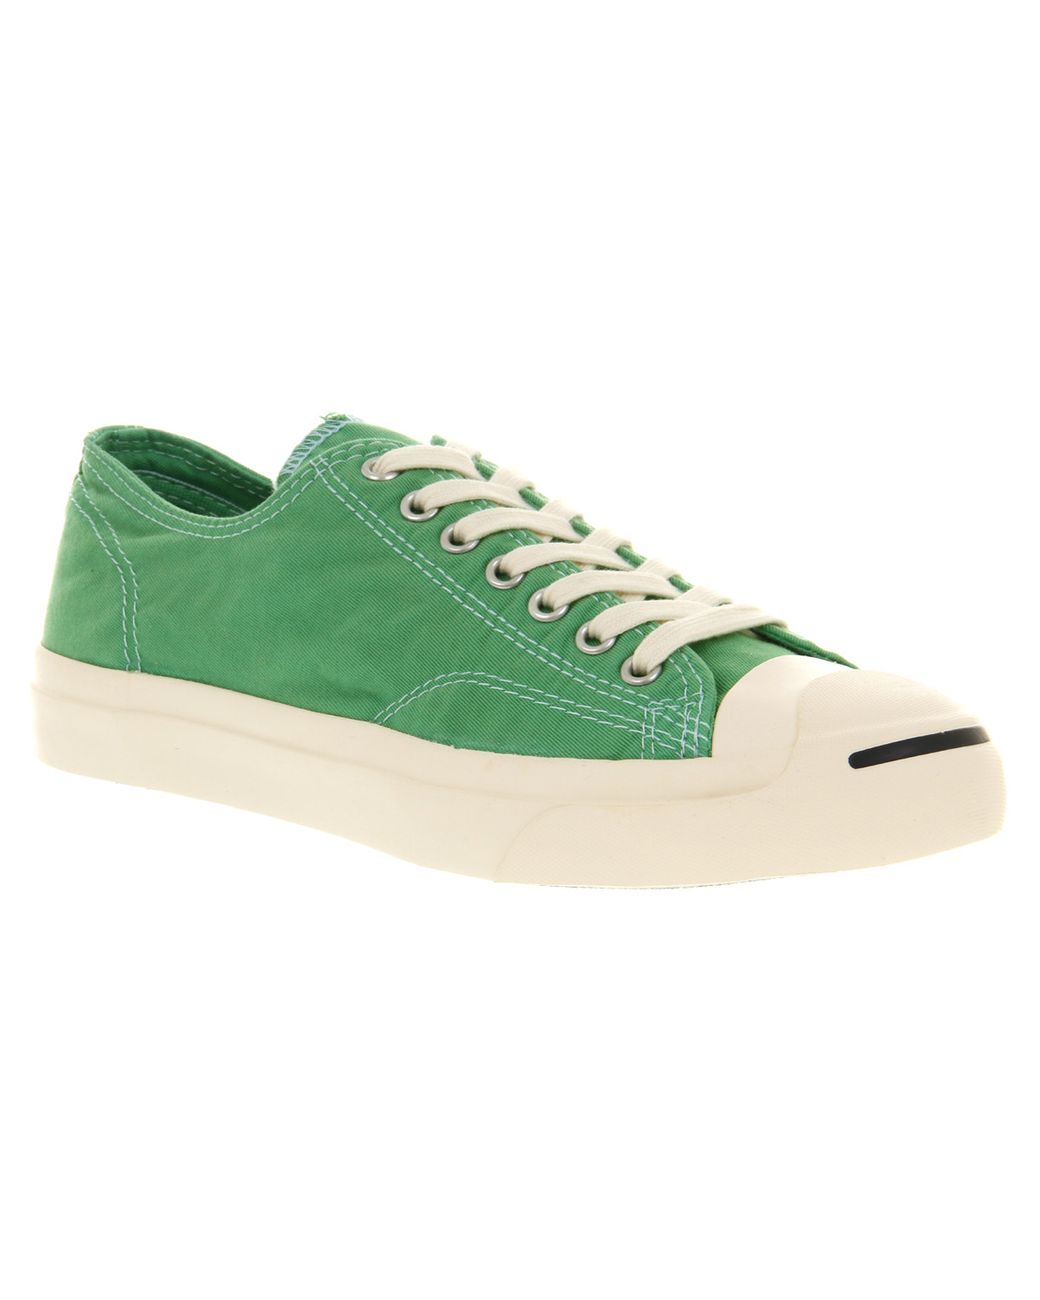 green jack purcell converse